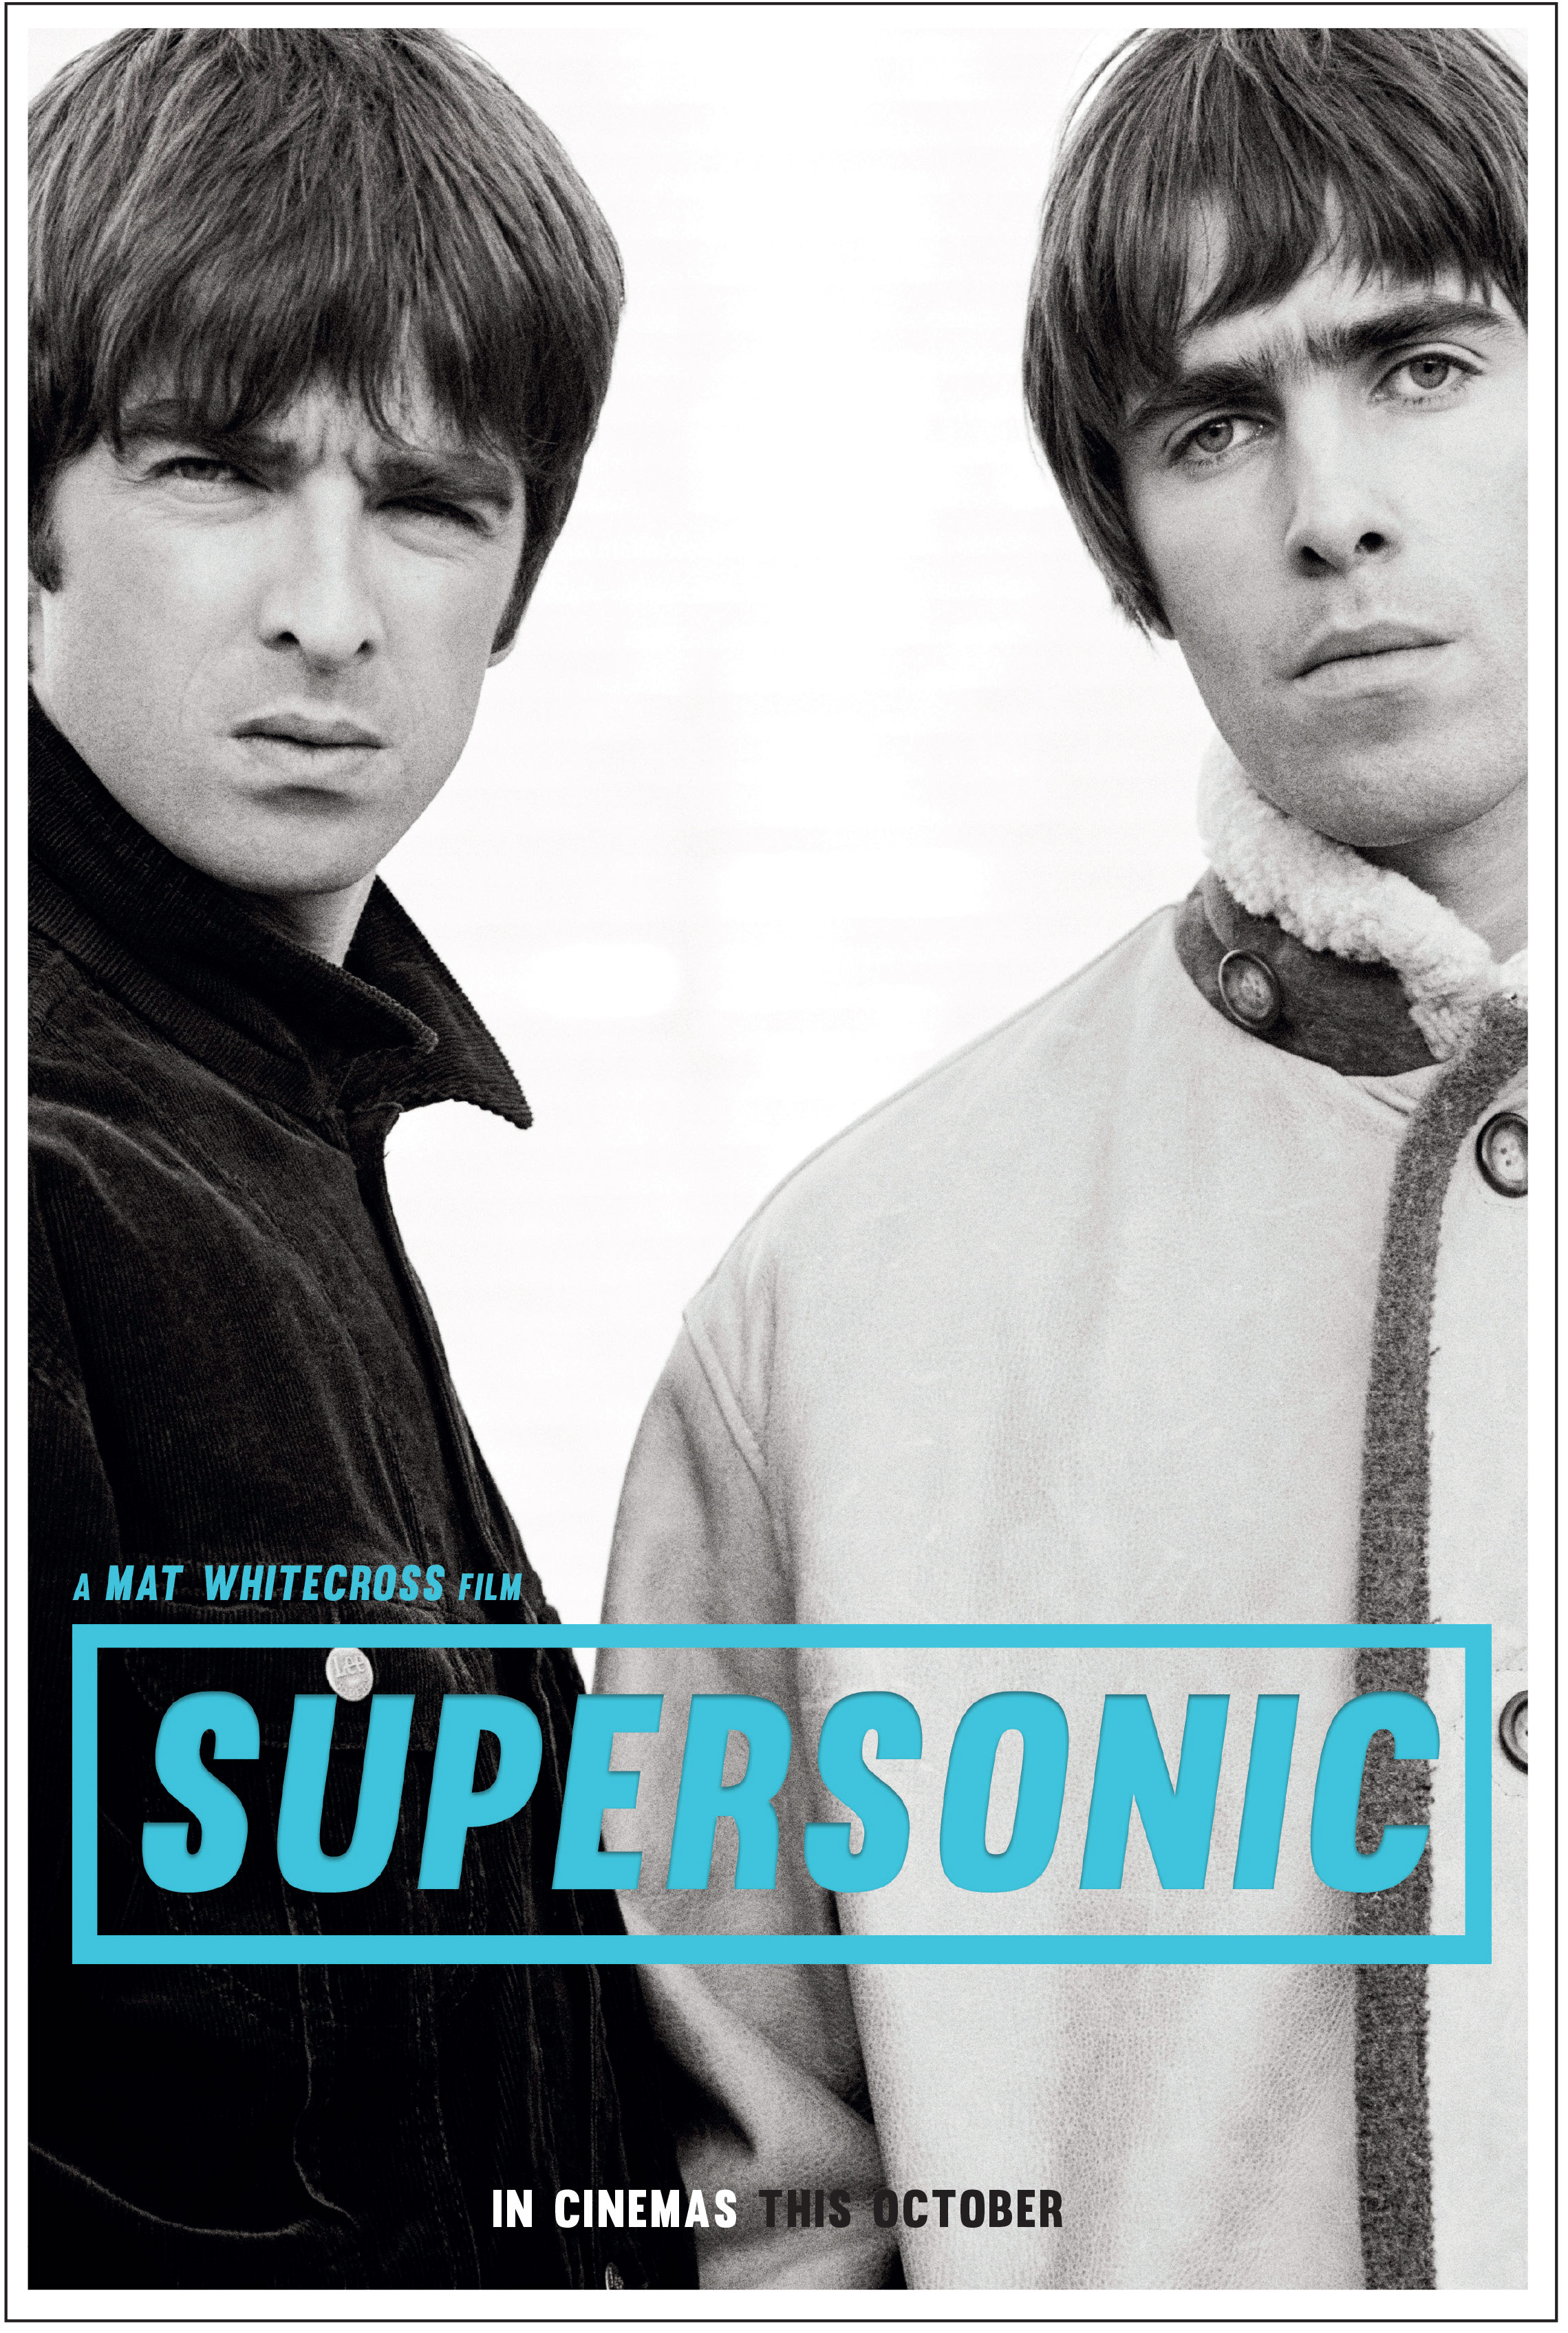 oasis-supersonic-film-poster--1463389909.jpg